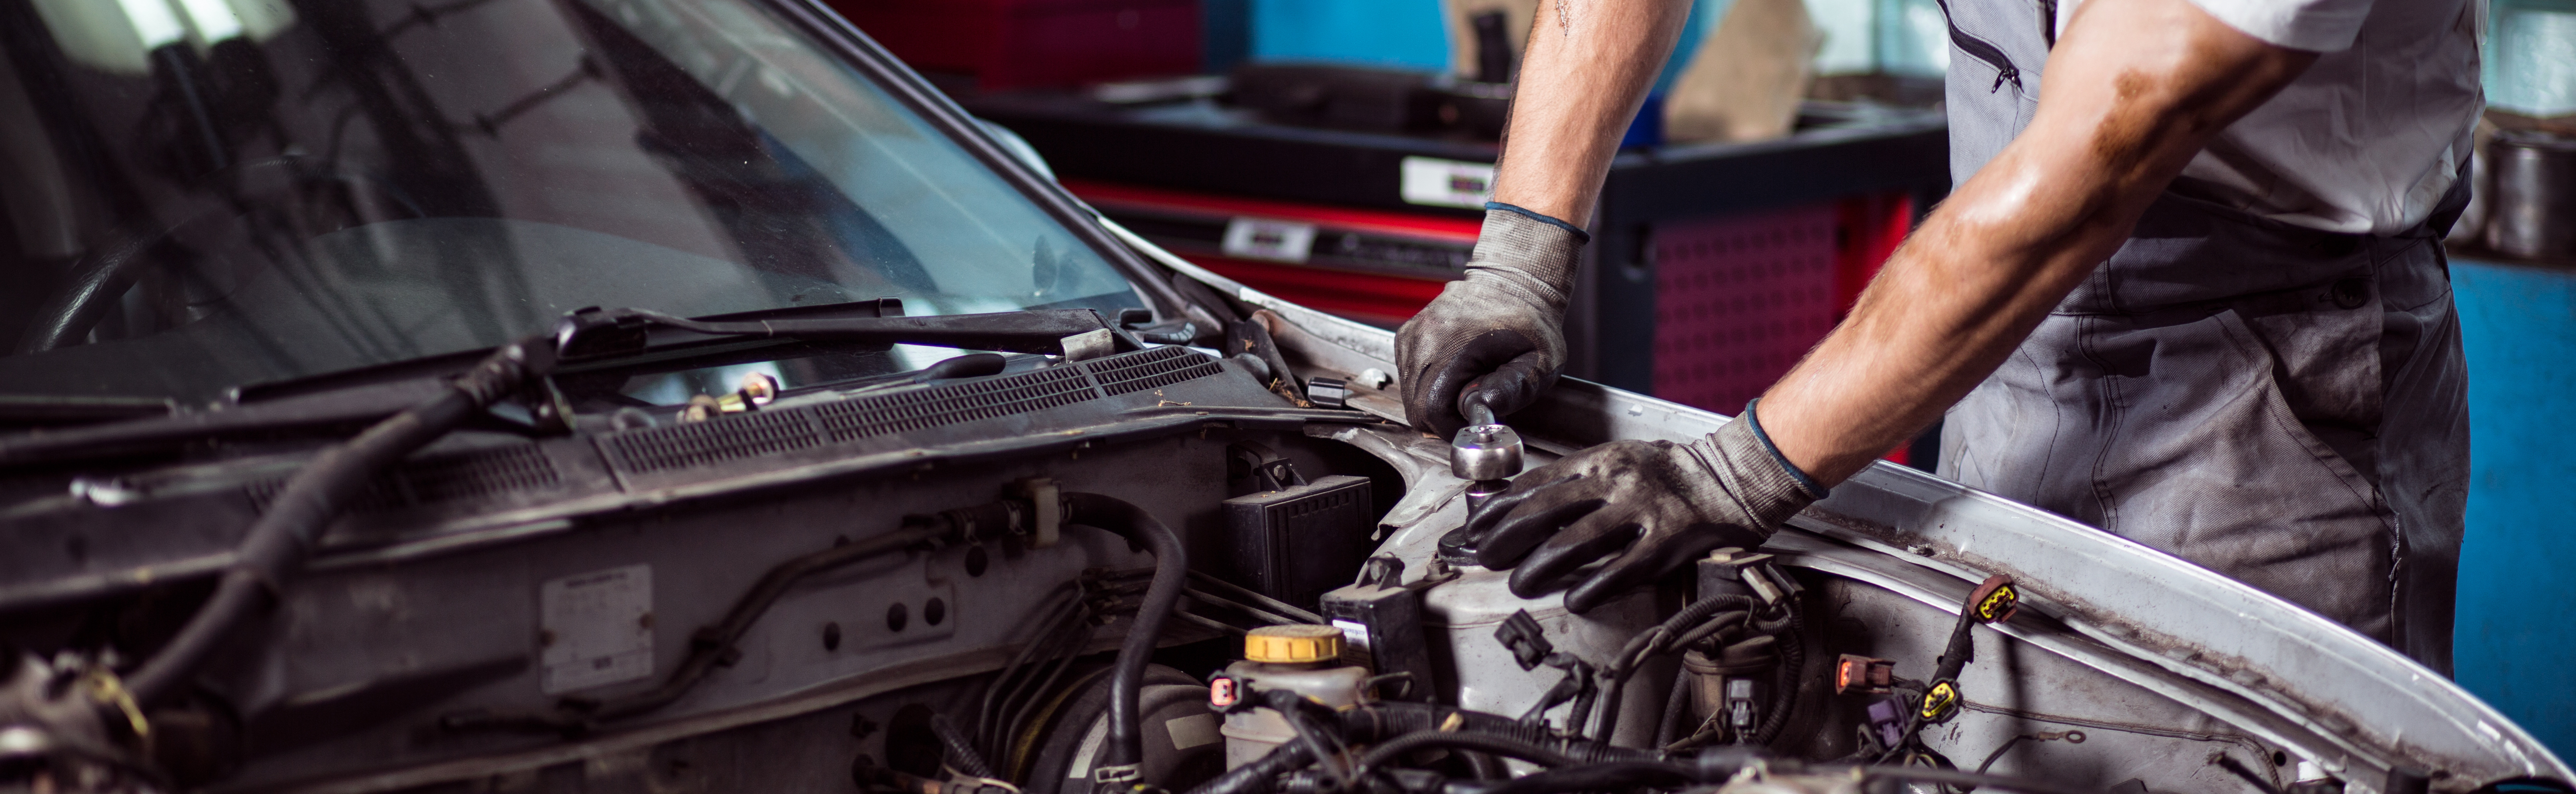 PROFESSIONAL CAR REPAIRS, BRAKES SERVICES, CAR BATTERIES AND TUNE-UPS, WE DO IT ALL! 